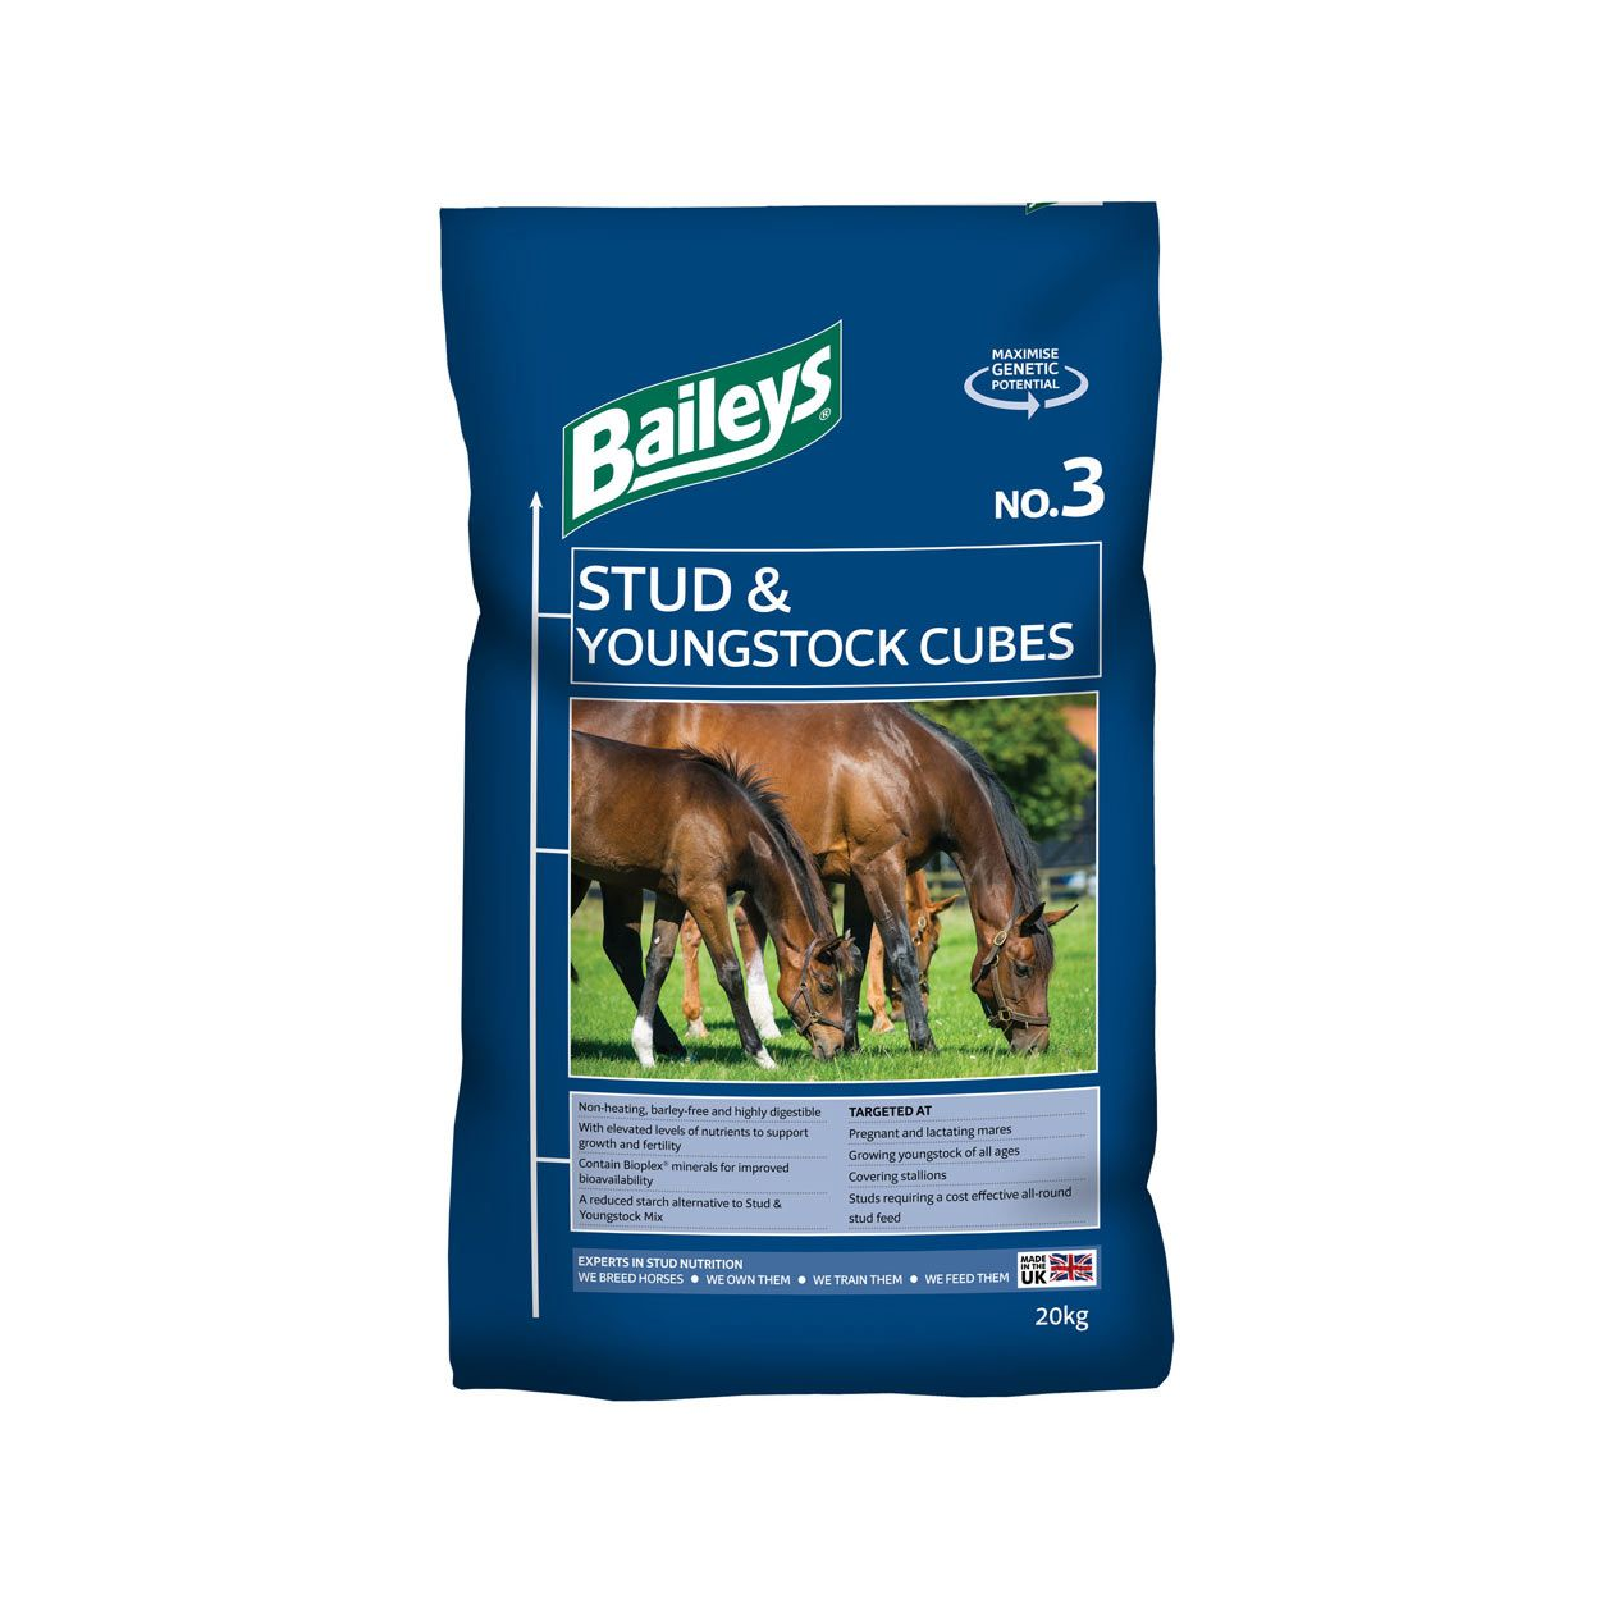 Baileys No 3 Stud & Youngstock Cubes 20kg